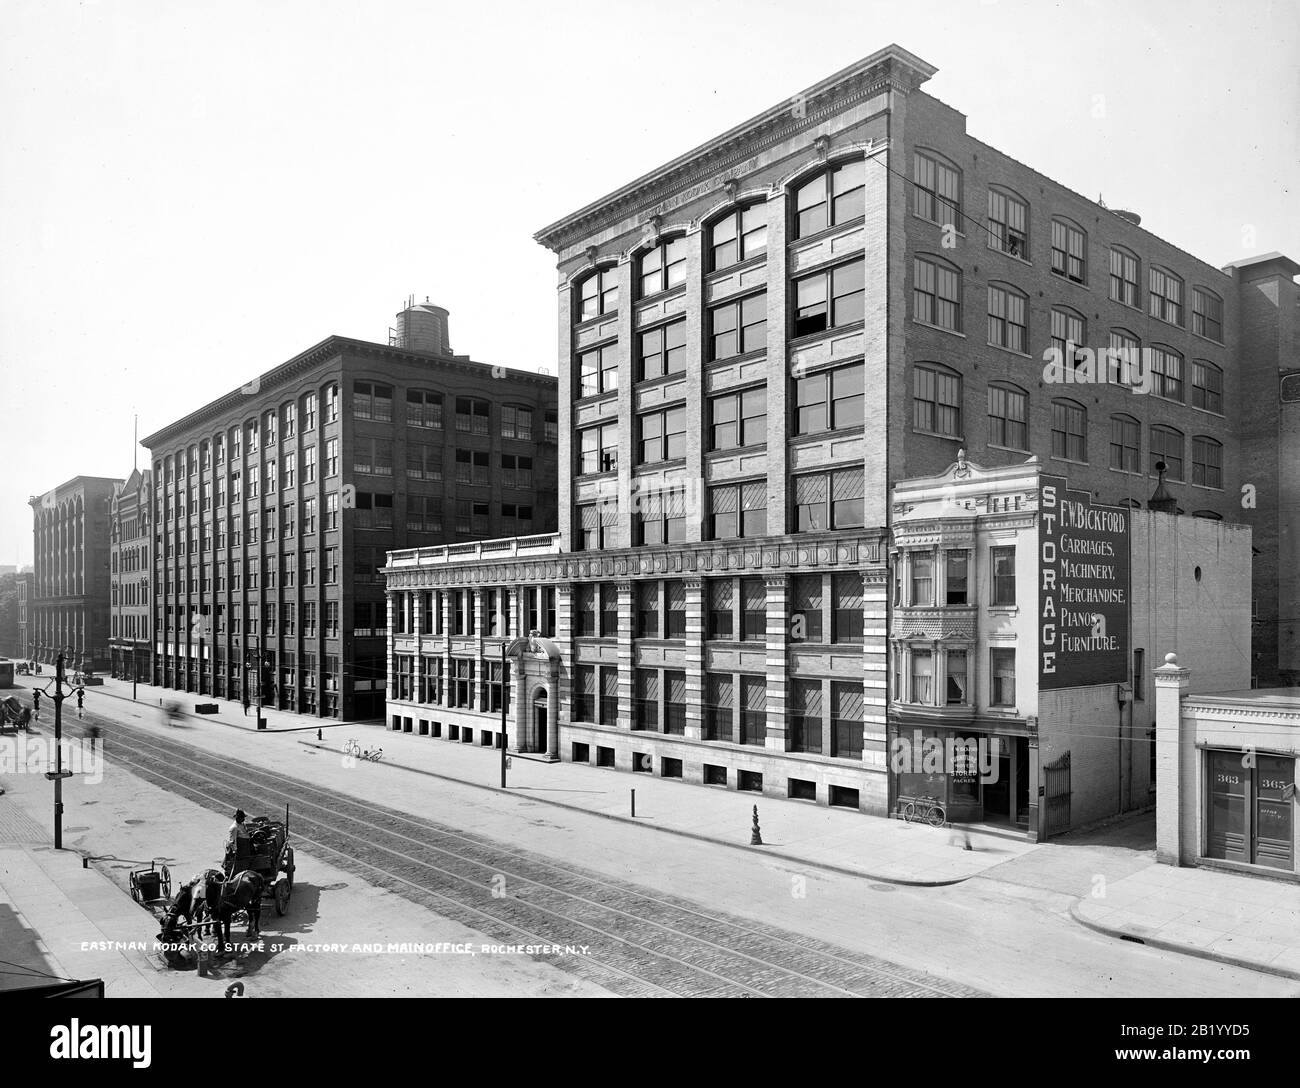 EASTMAN KODAK Vintage B&W Office & Factory Buildings 1905 Horse drawn cart in foreground. Eastman Kodak Company factory and main office in Rochester, New York USA Stock Photo